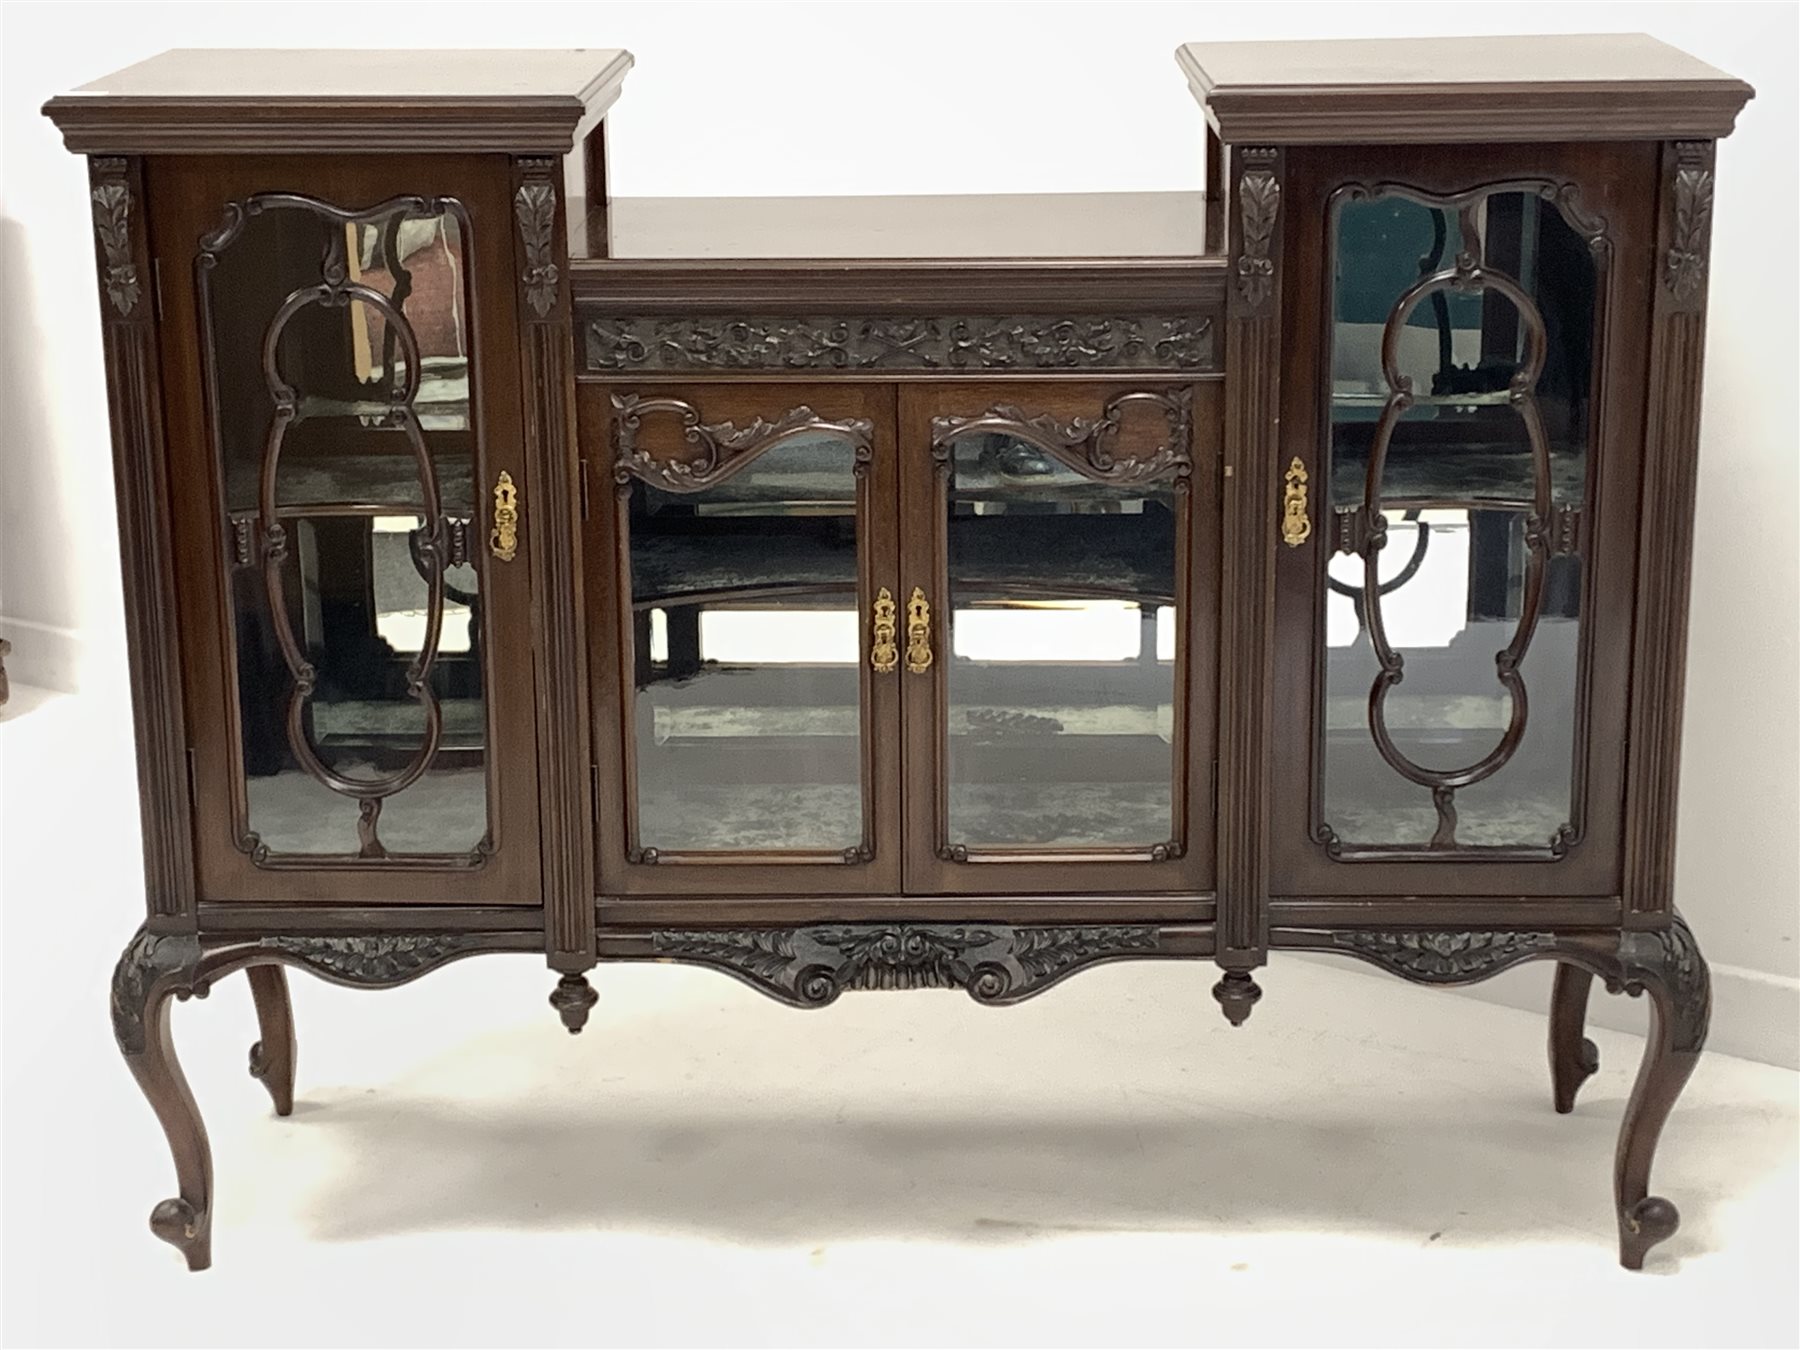 Early 20th century Georgian style mahogany display cabinet, having an incised frieze decorated with - Image 2 of 4